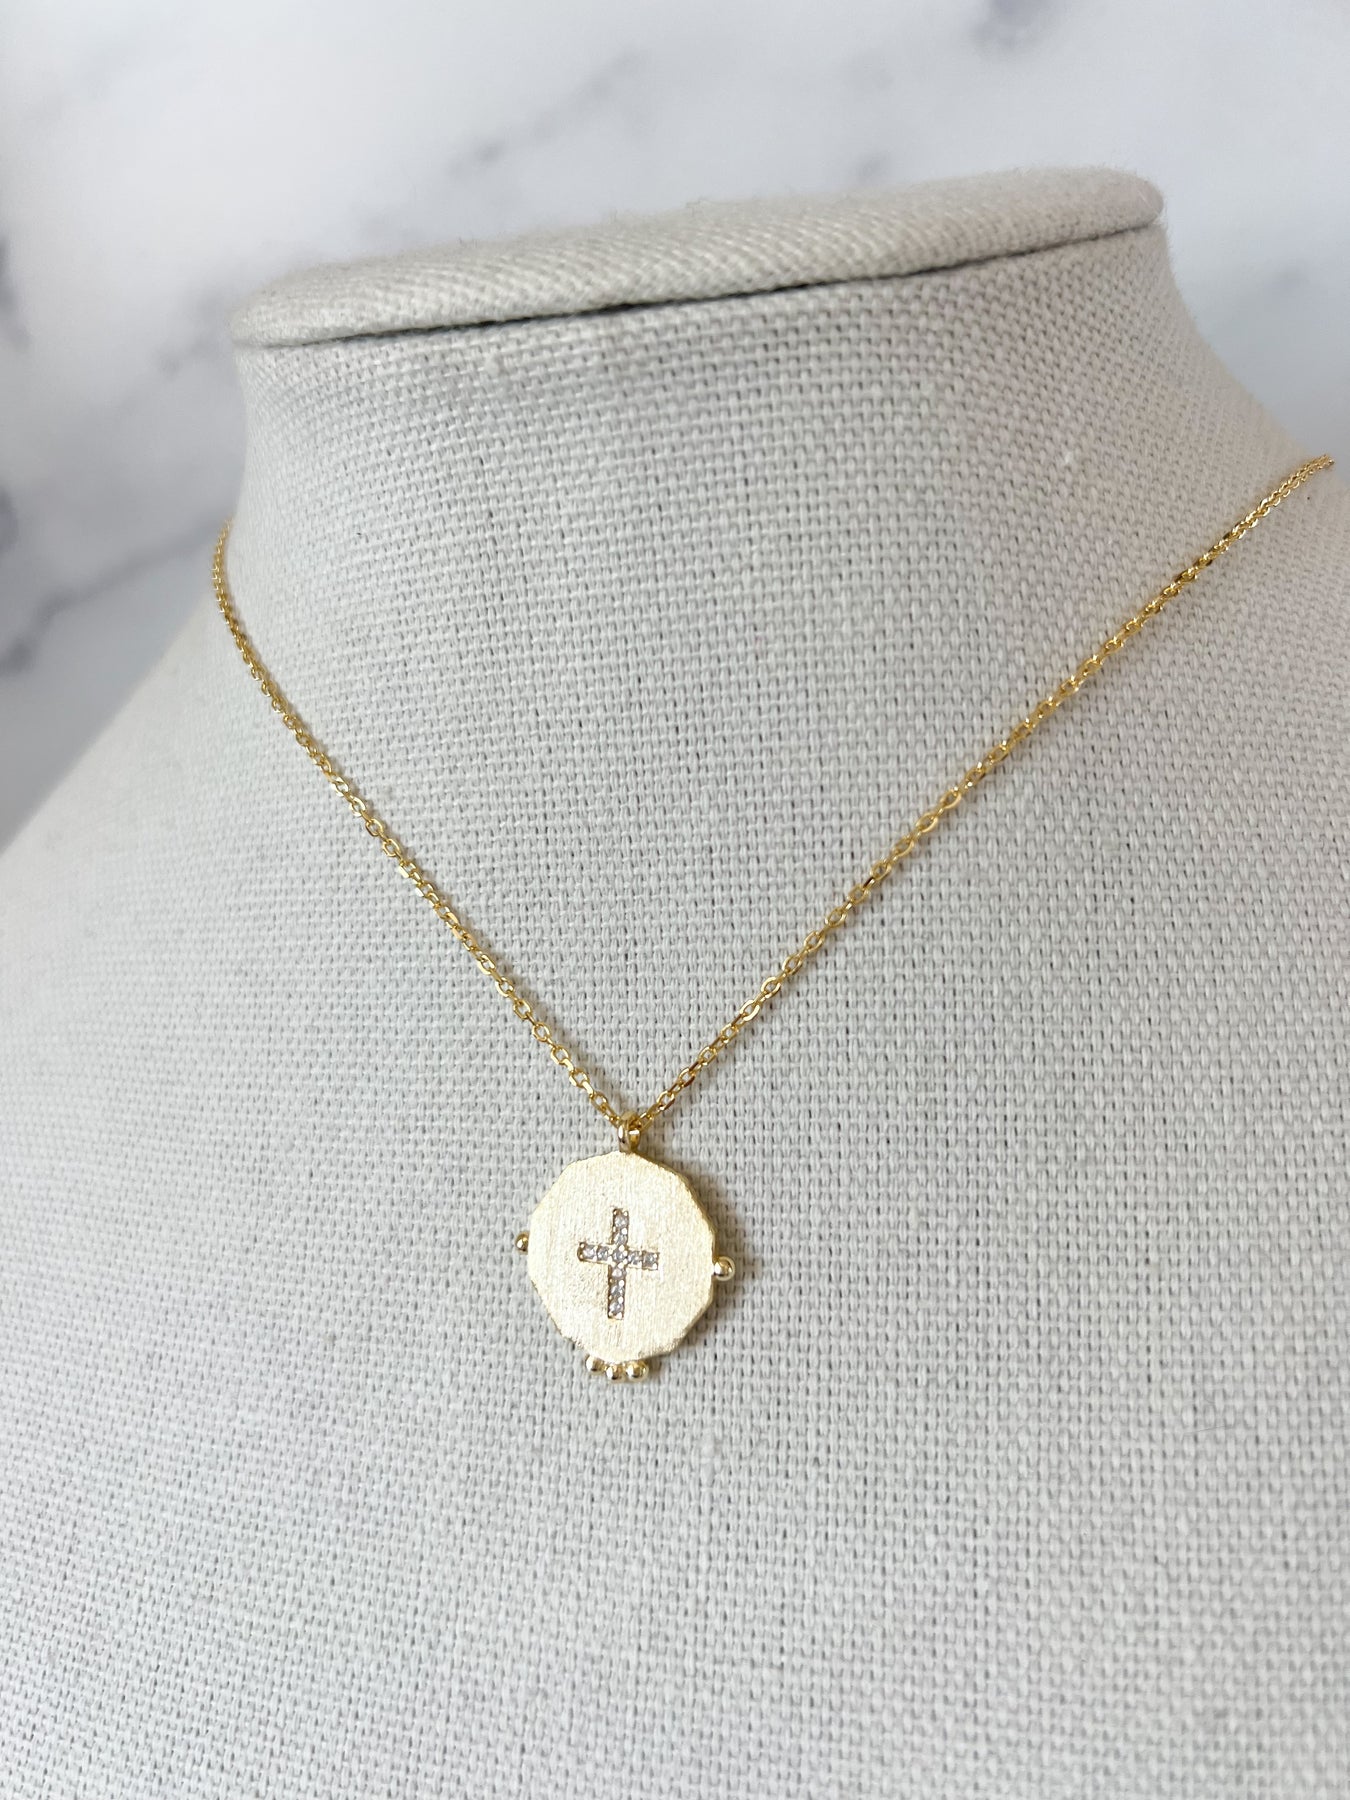 4th Century Christian Coin in a 14k Gold Hammered Cross Pendant